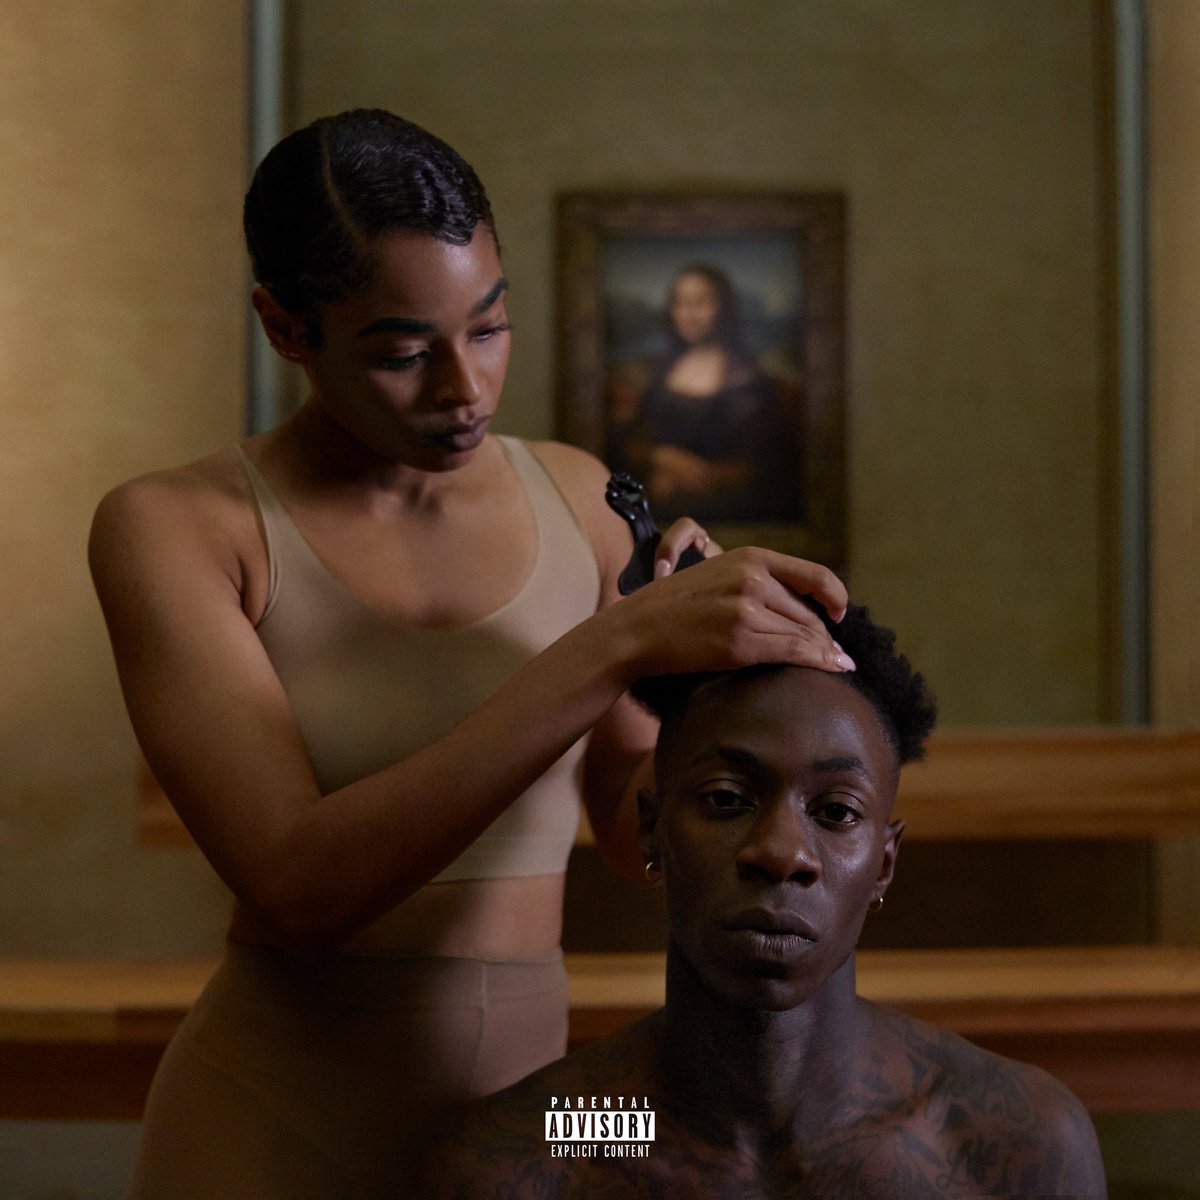 On June 16th 2018, The CARTERS surprised released “EVERYTHING IS LOVE” album a week before my birthday 